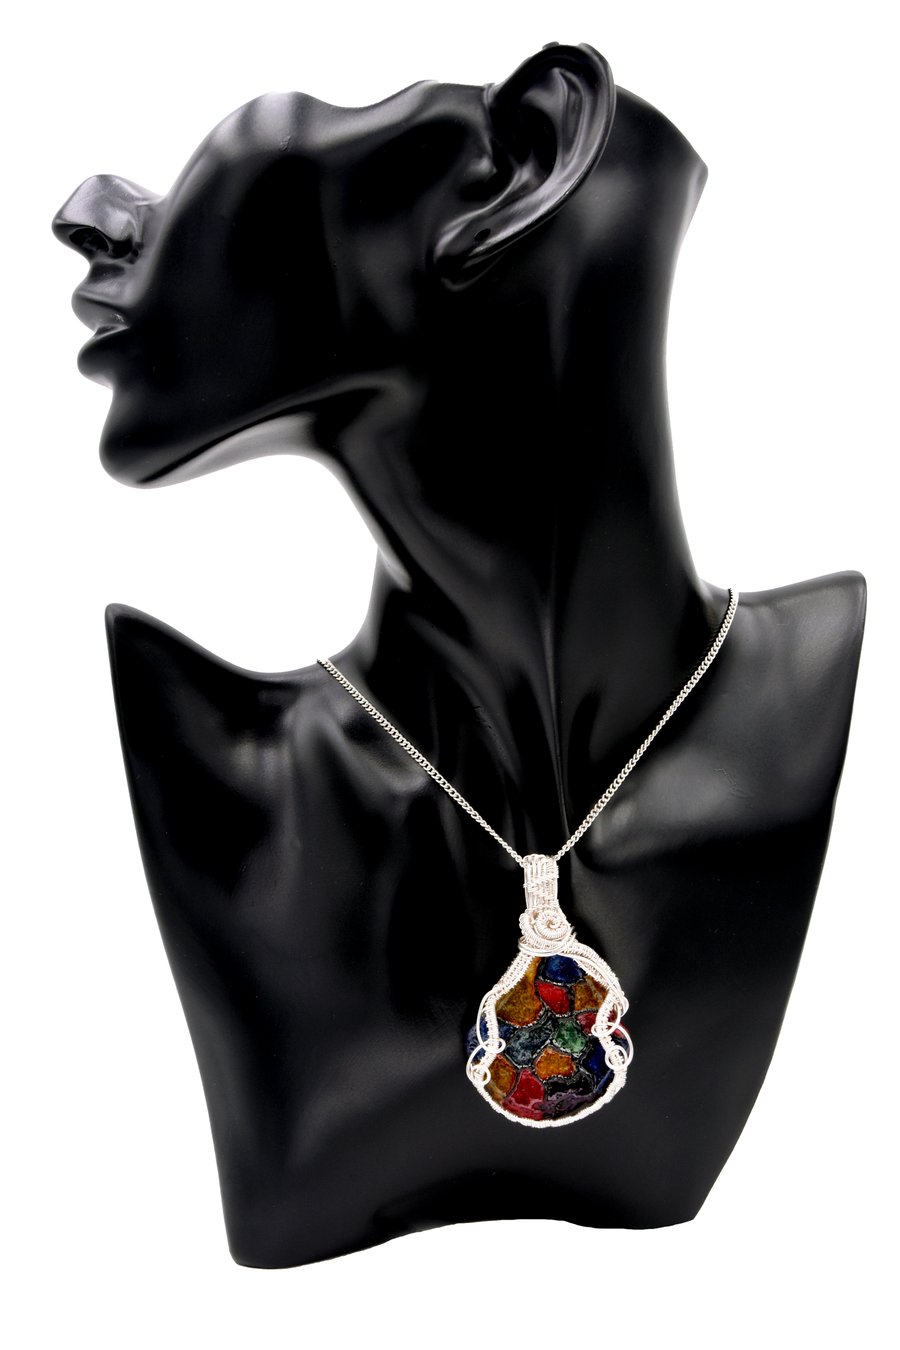 Pendant, wire wrapped stained glass Gaudi style